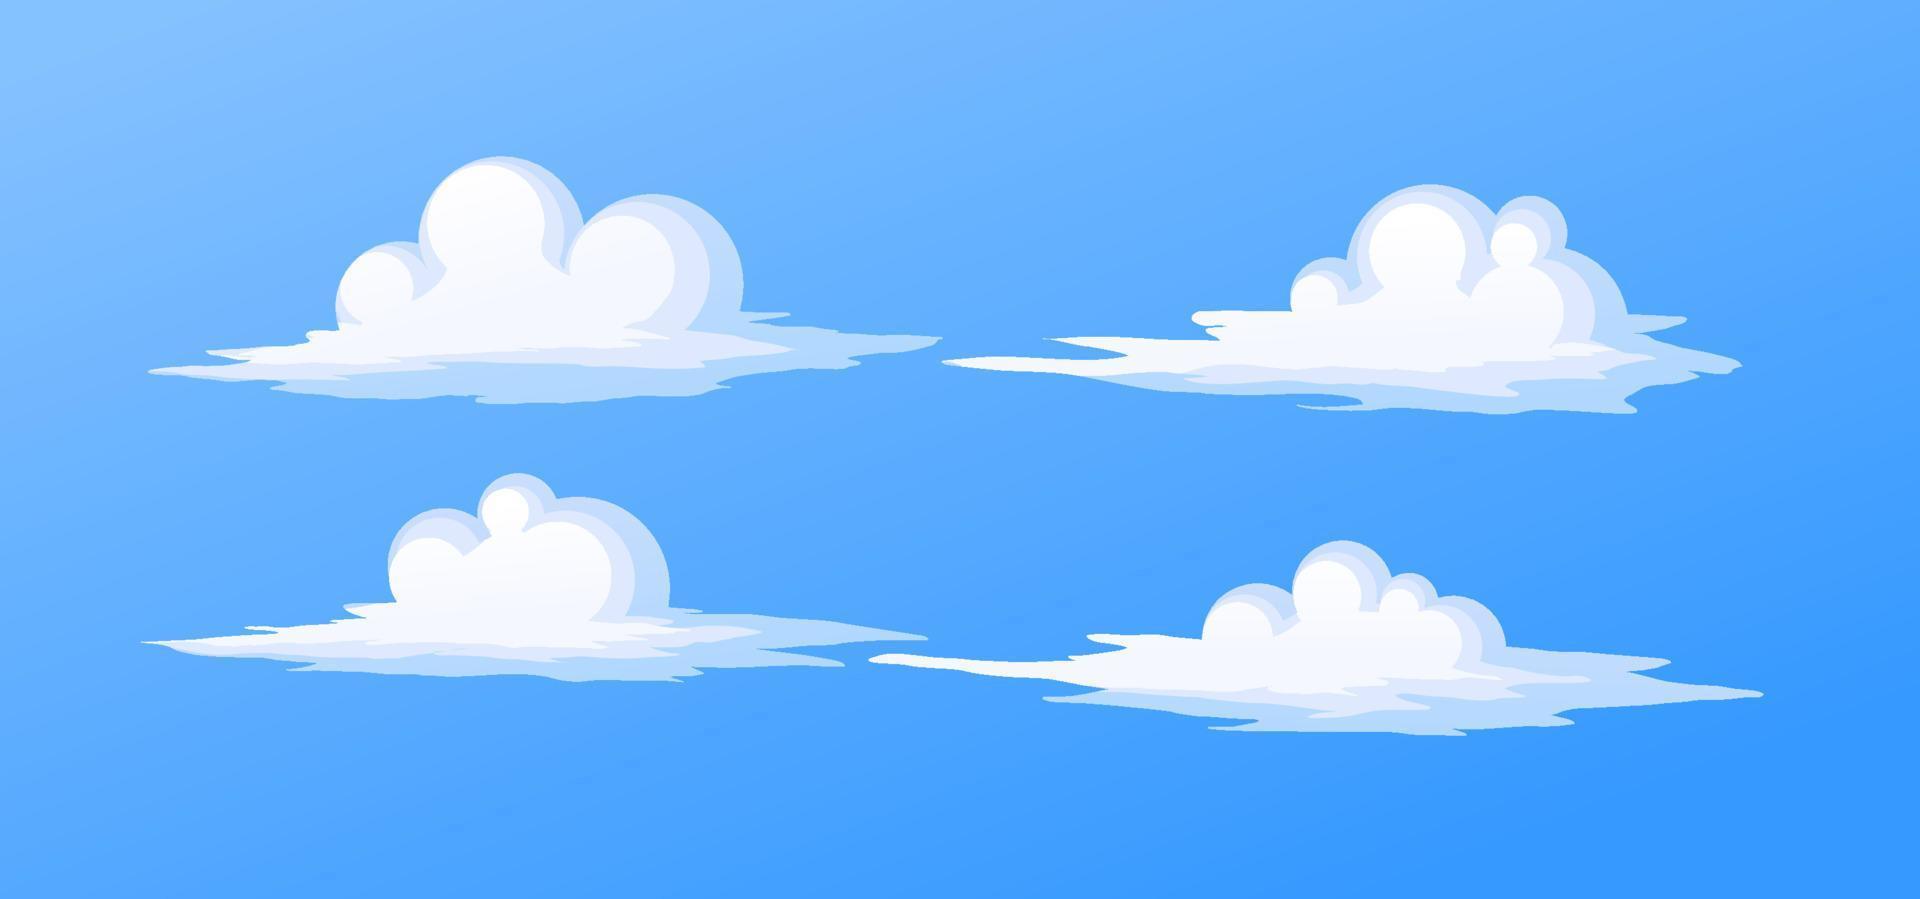 White Clouds Anime Cartoon Style in The Sky Blue Vector Illustration